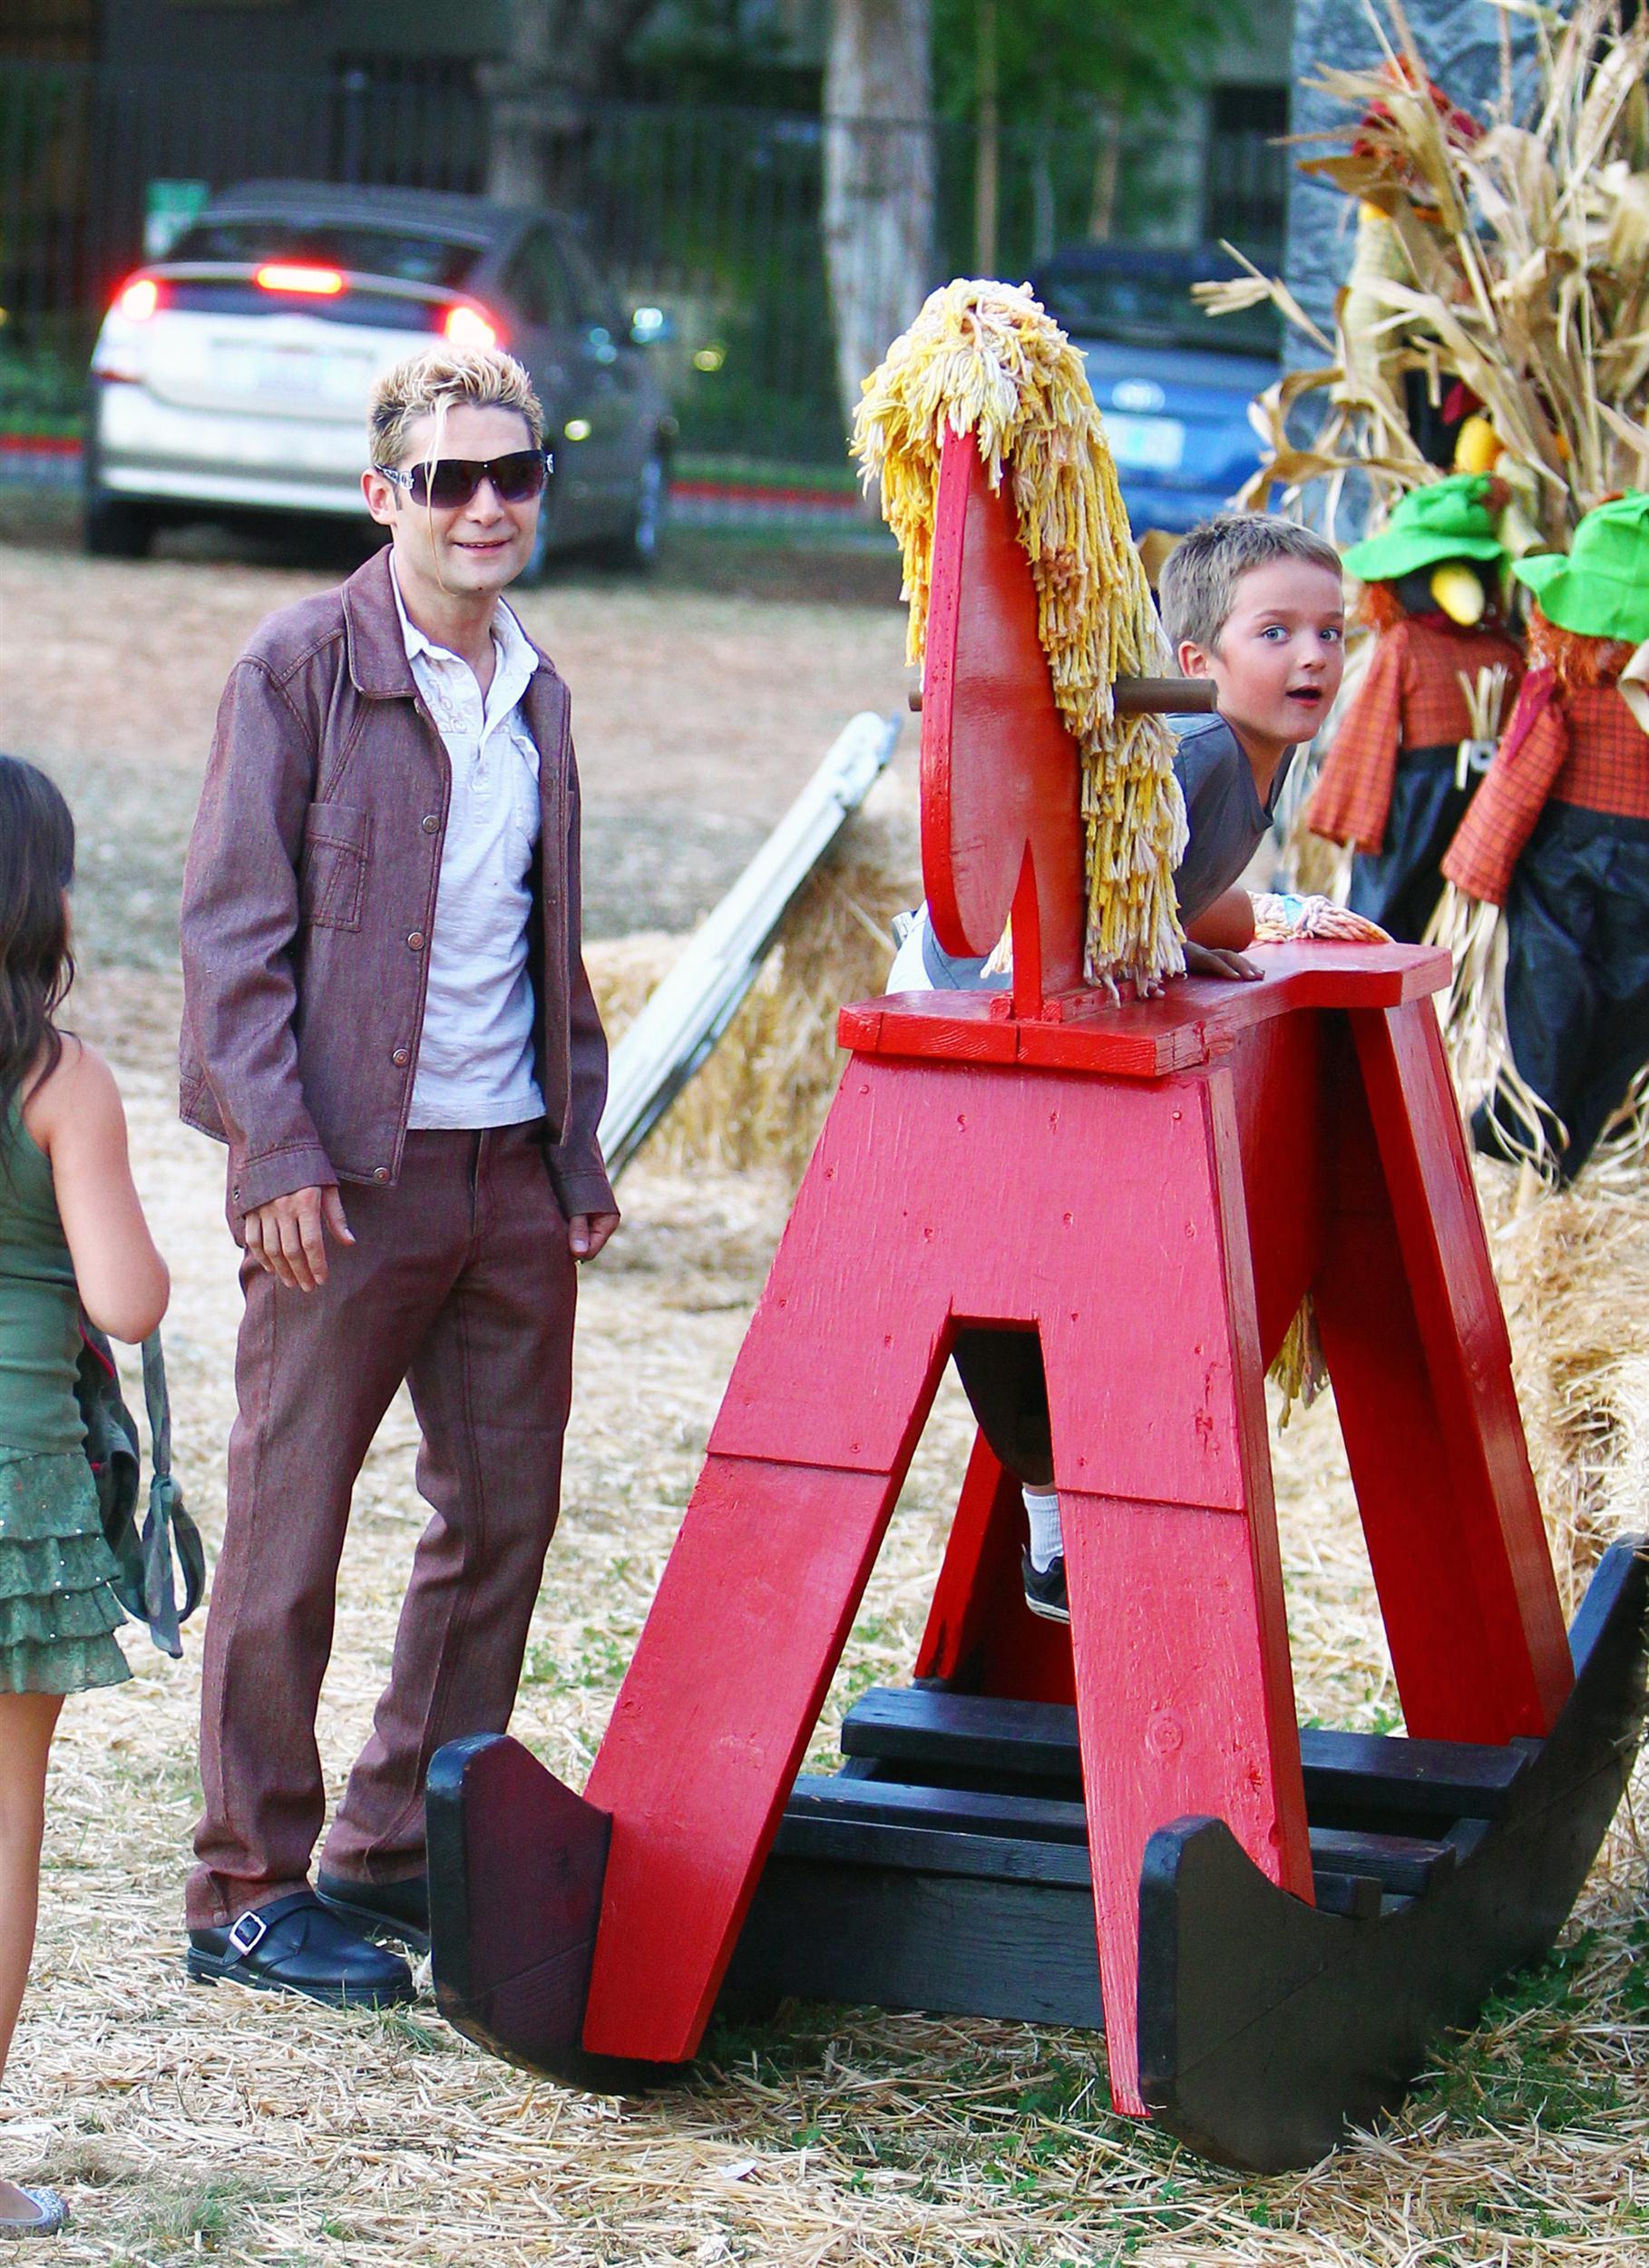 Corey Feldman and his family enjoy the day at Mr Bones Pumpkin Patch | Picture 102329